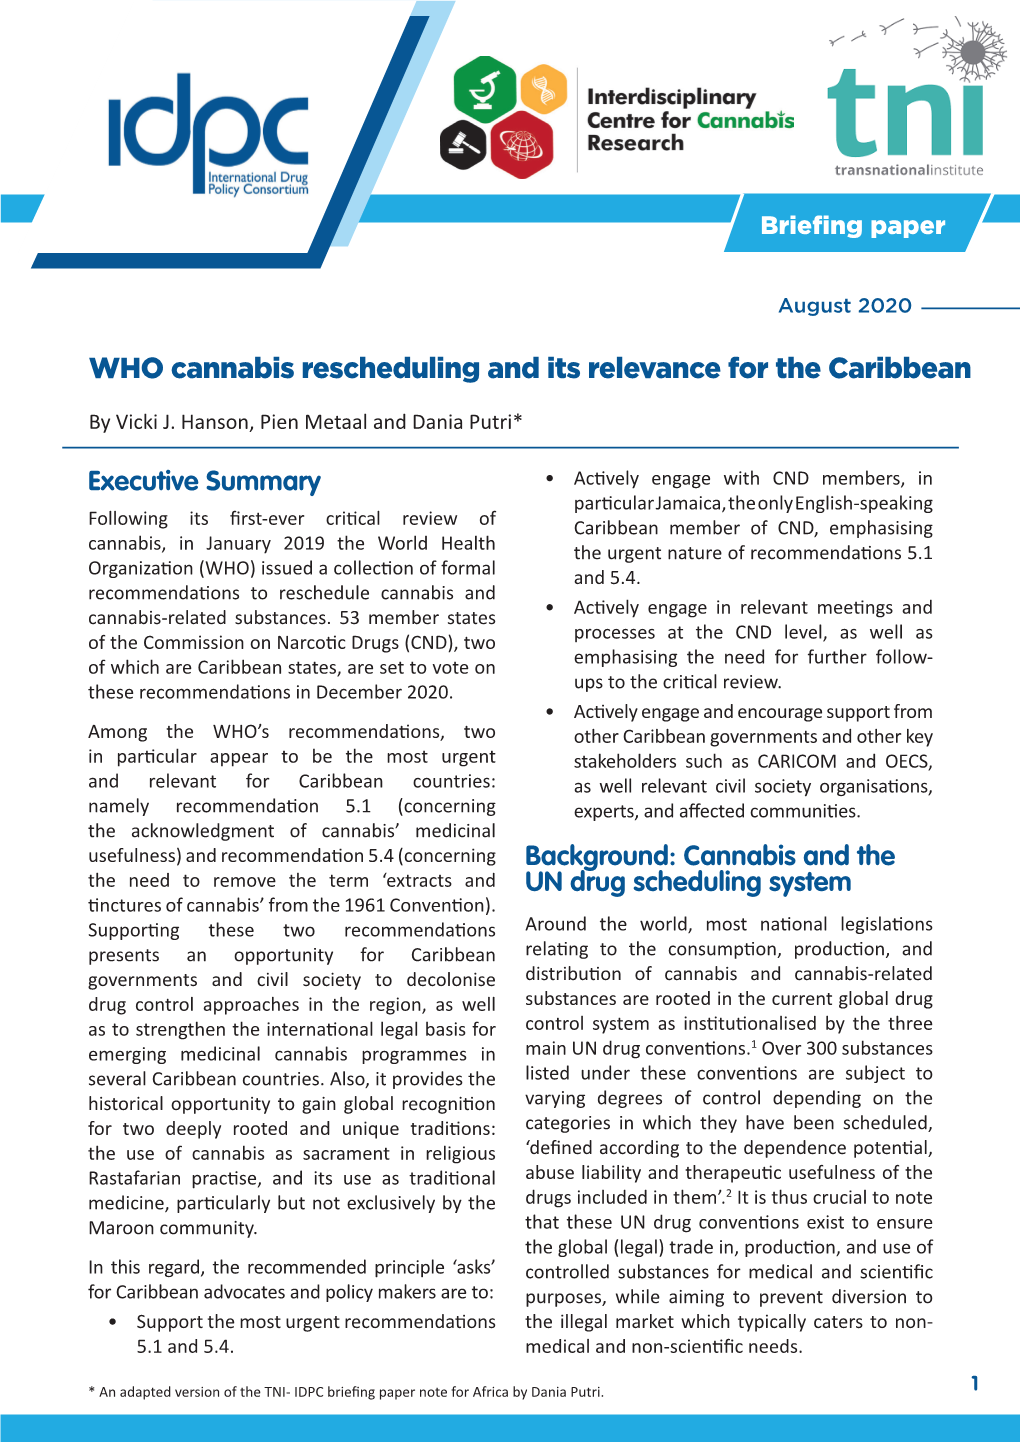 WHO Cannabis Rescheduling and Its Relevance for the Caribbean